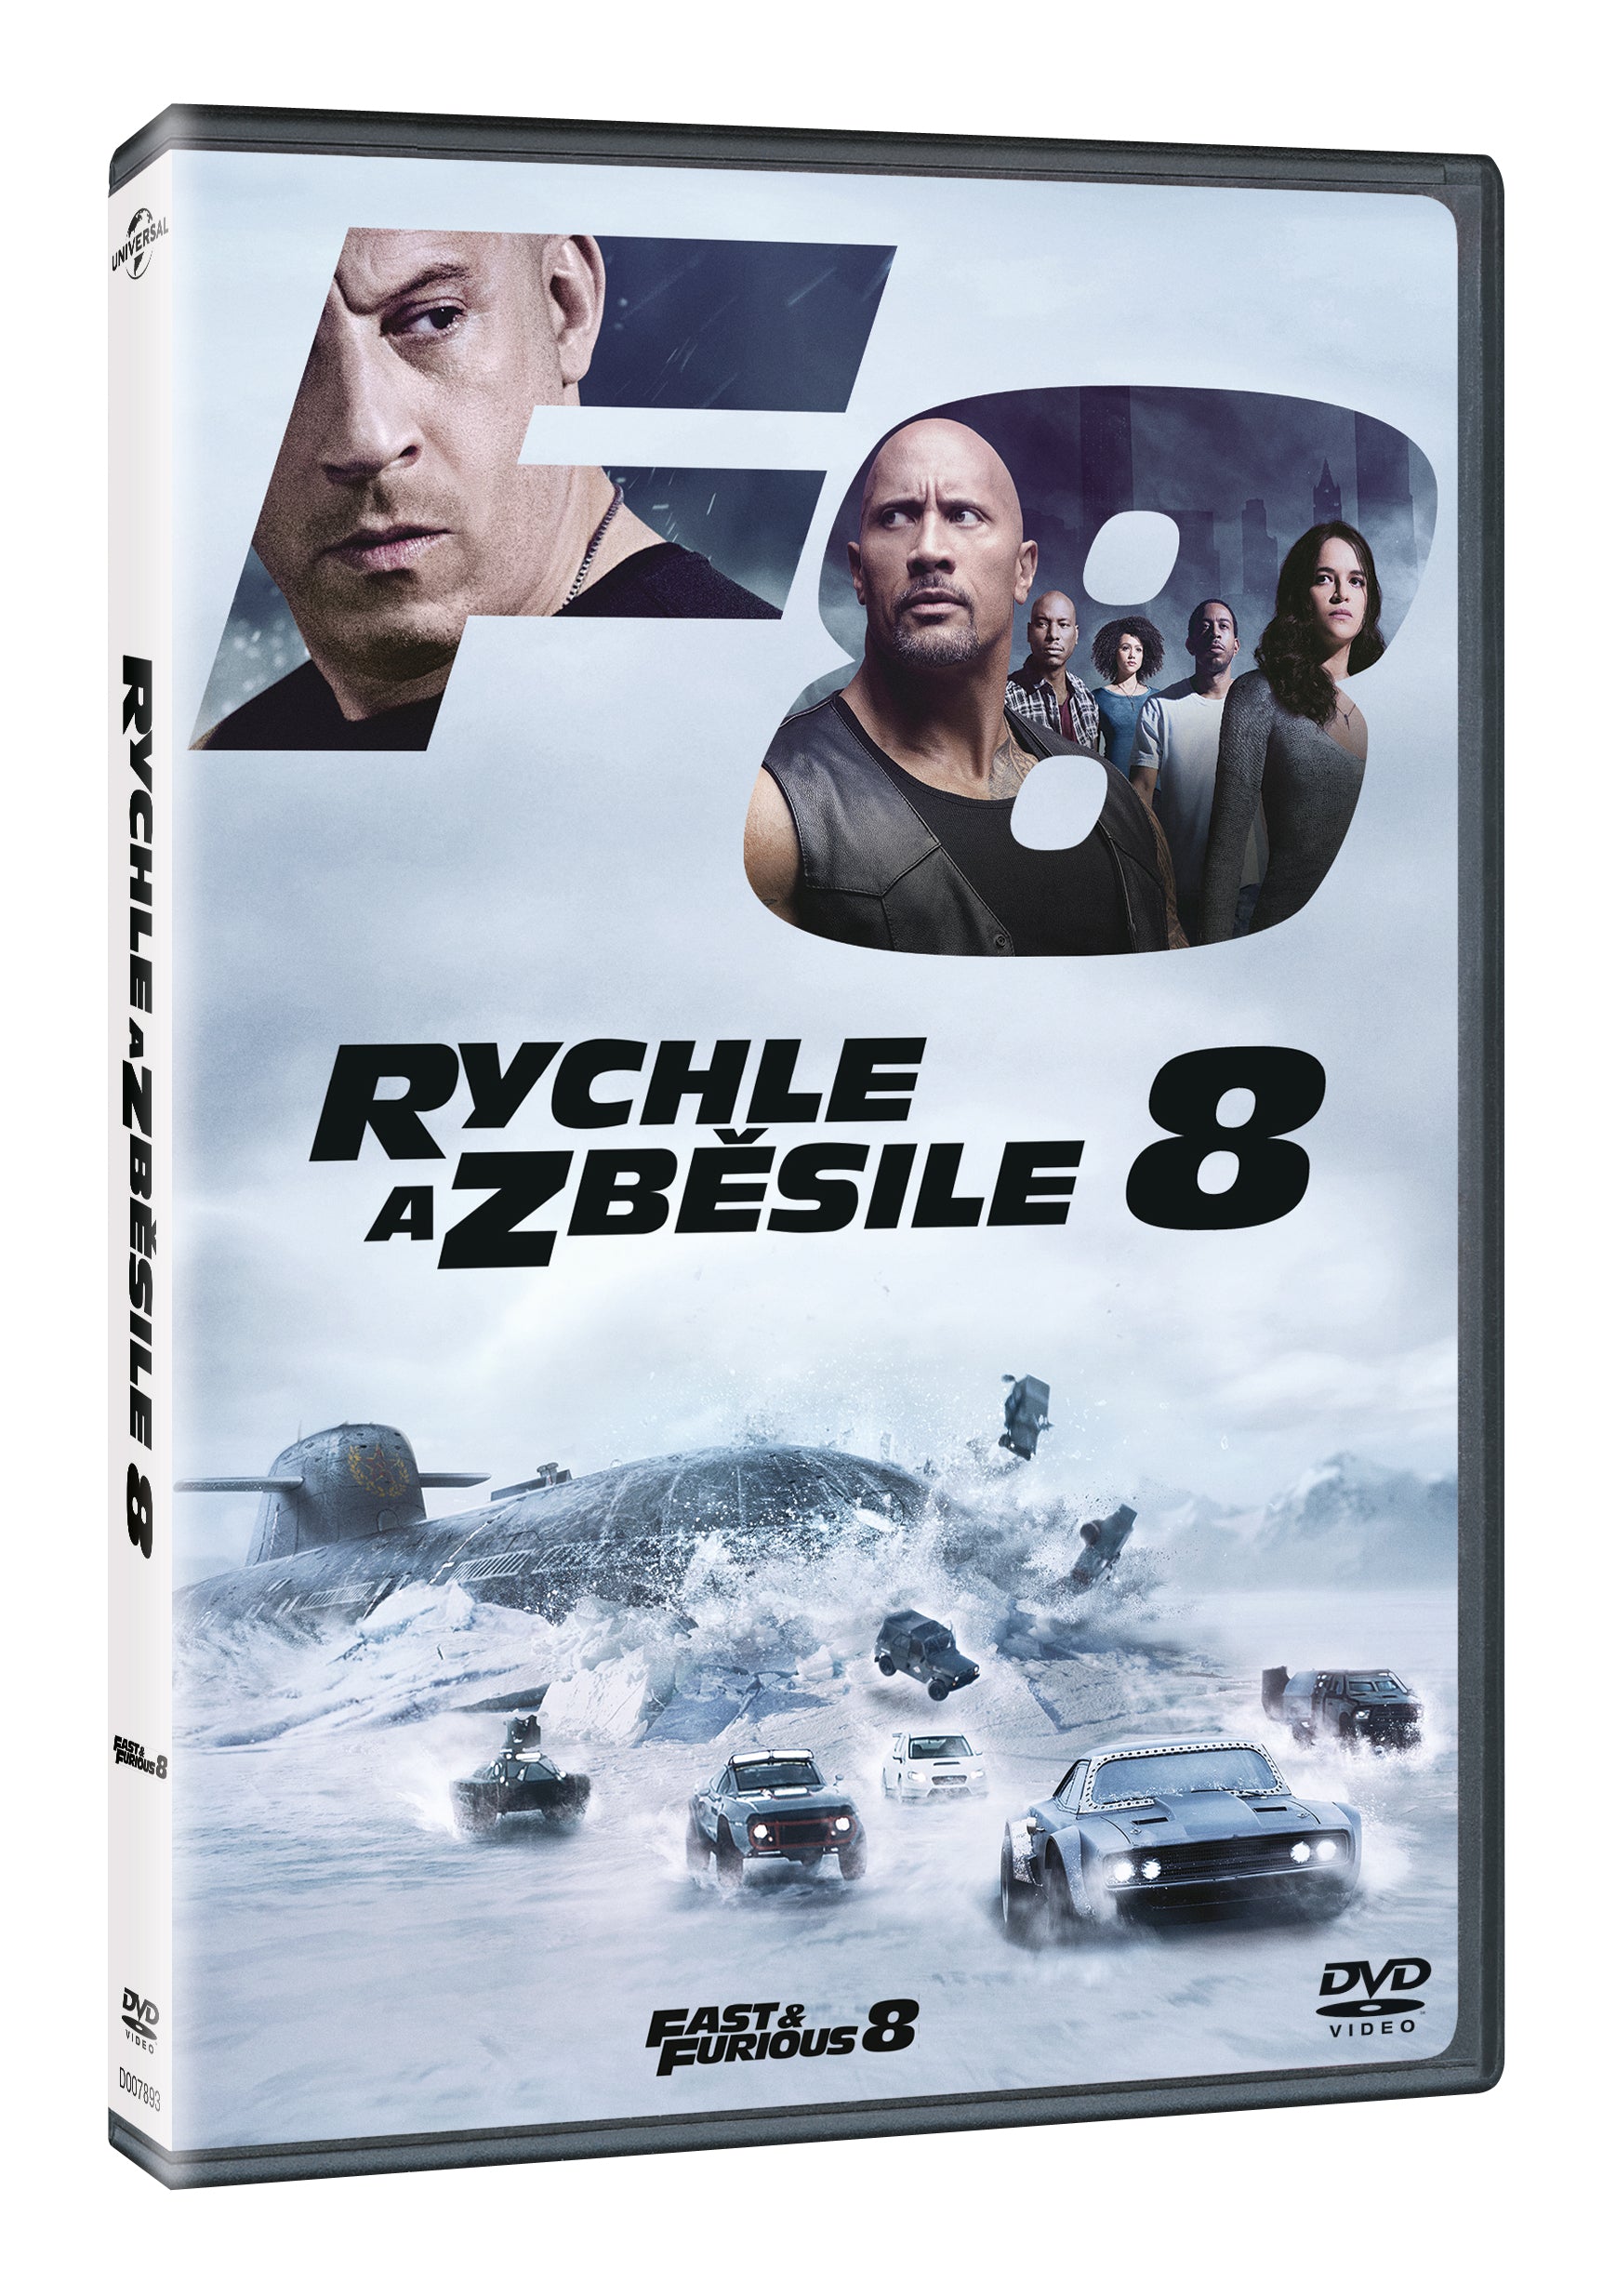 Rychle a zbesile 8 DVD / The Fate of the Furious